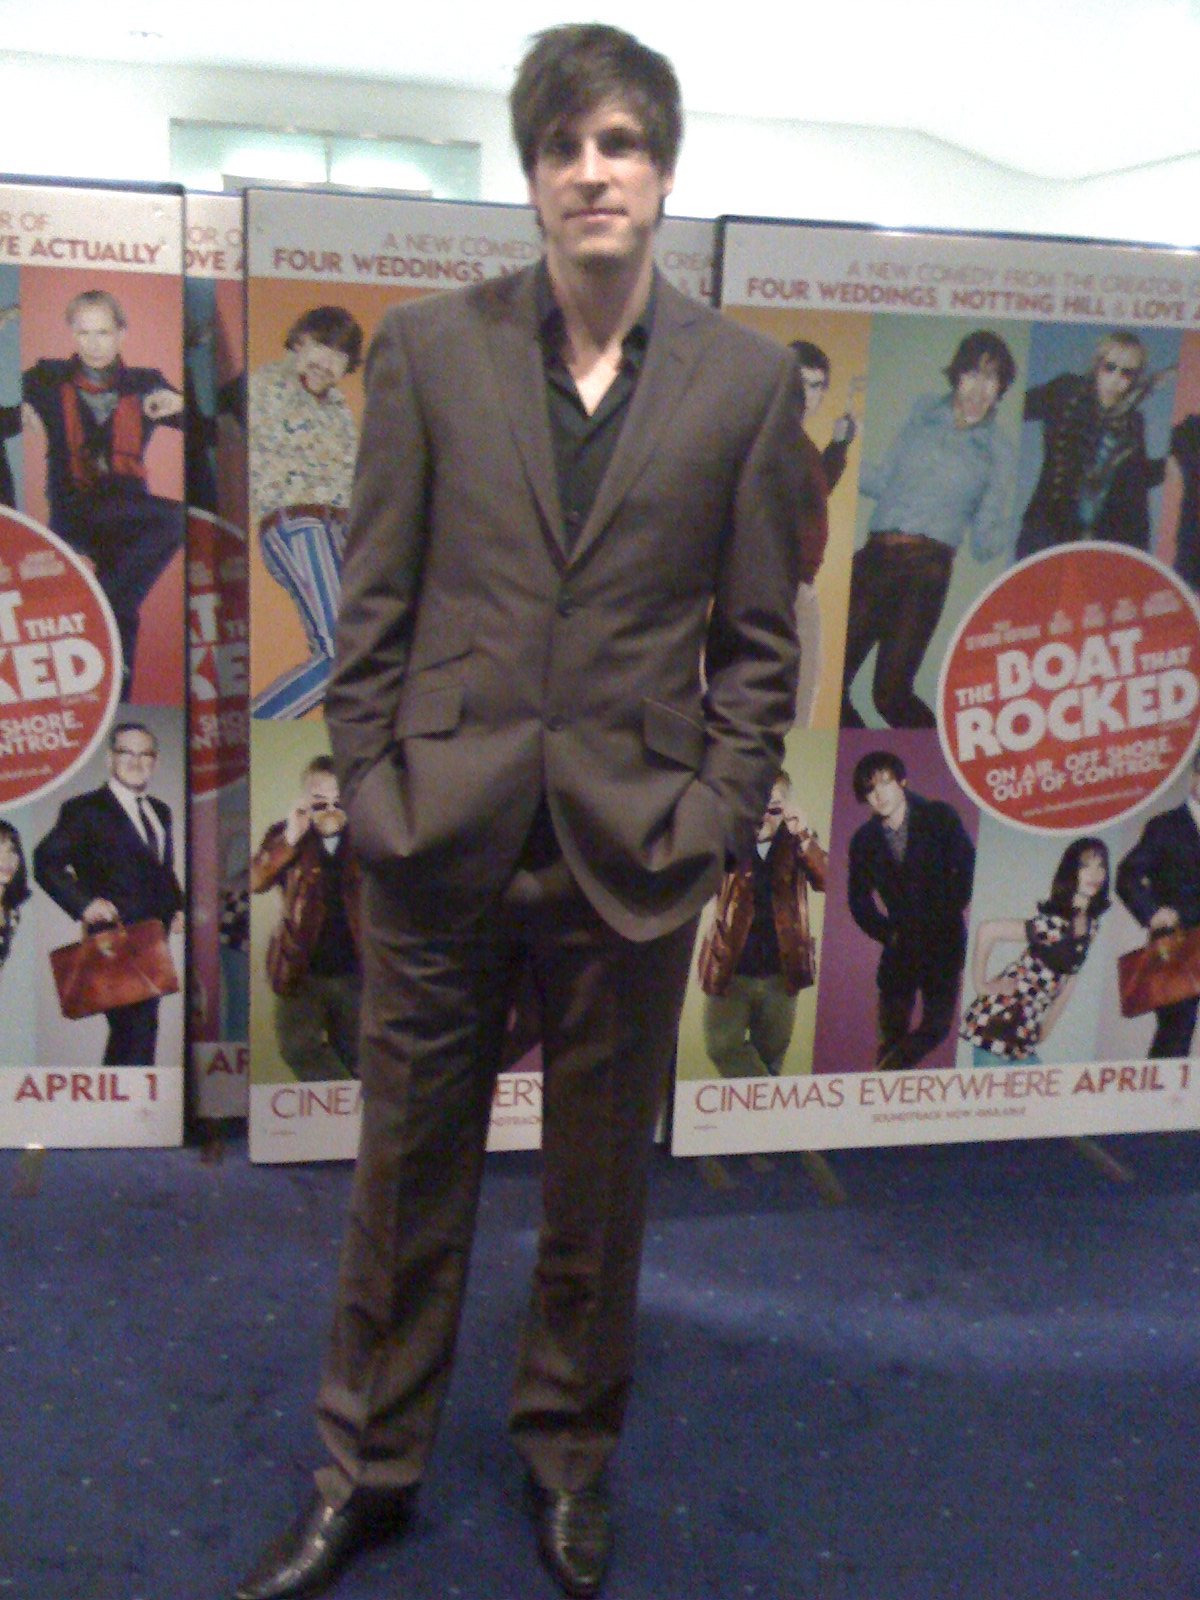 Giles Alderson at the premiere of 'The Boat that Rocked'